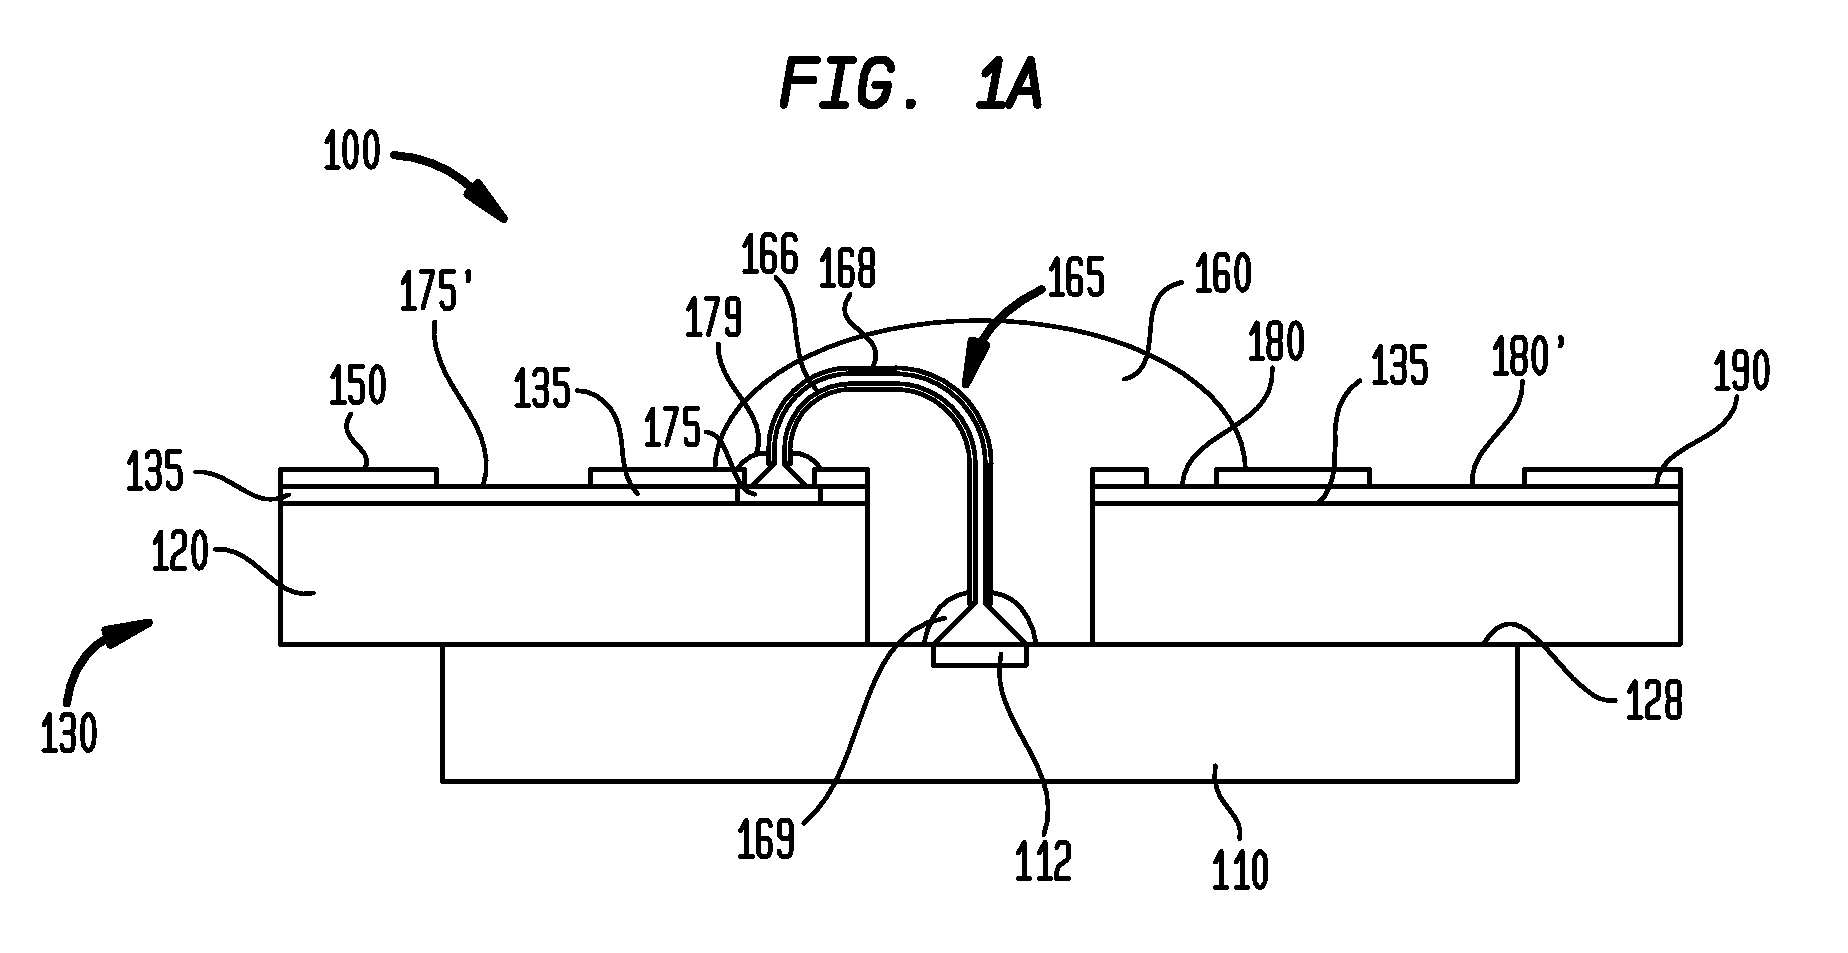 Microelectronic assembly with impedance controlled wirebond and conductive reference element